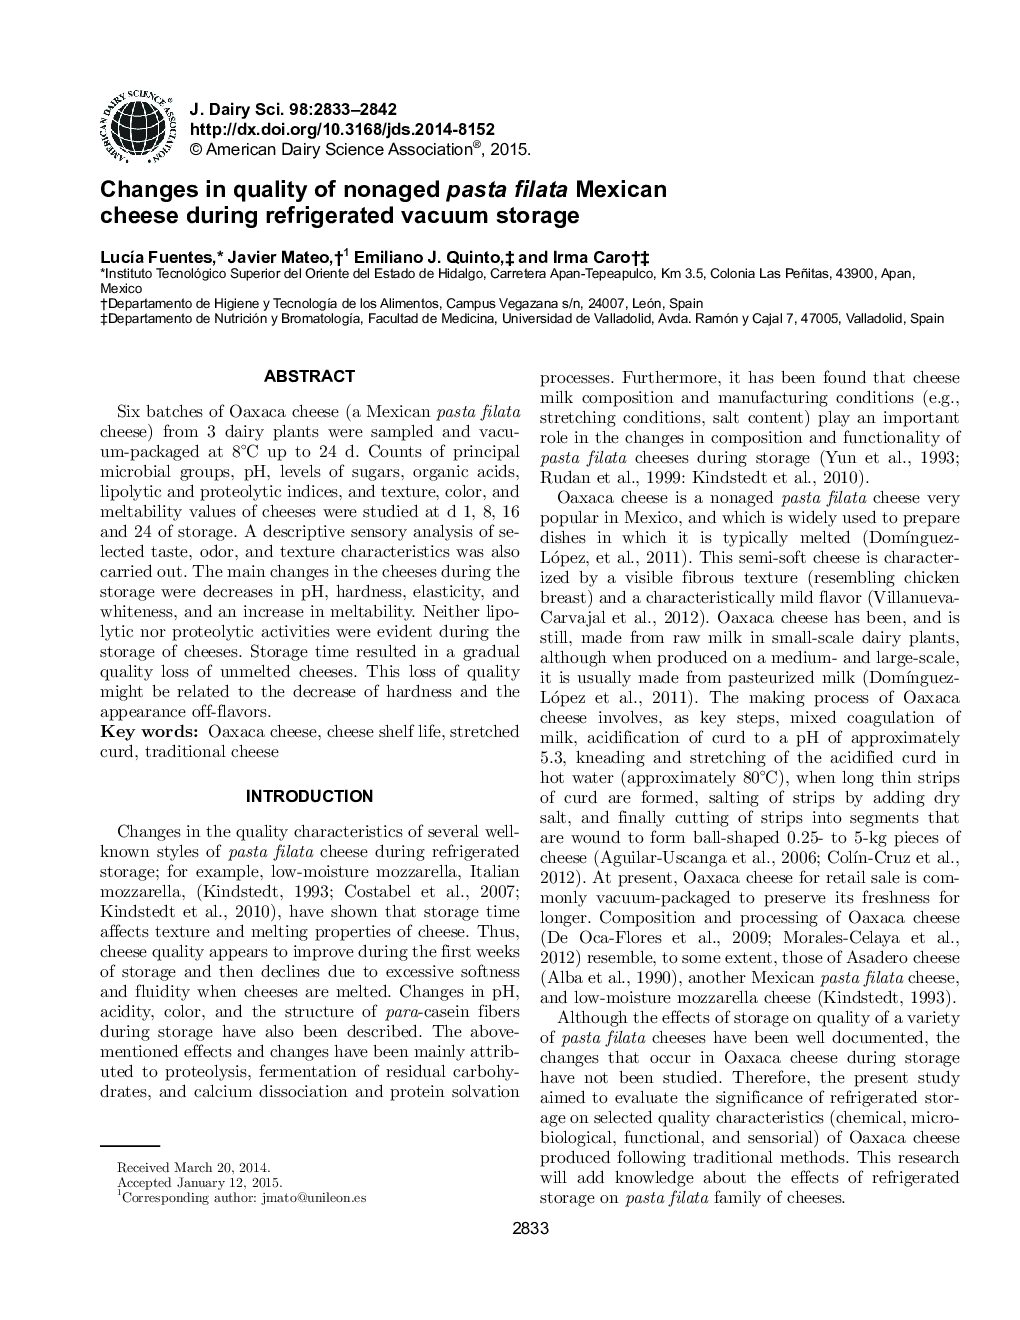 Changes in quality of nonaged pasta filata Mexican cheese during refrigerated vacuum storage